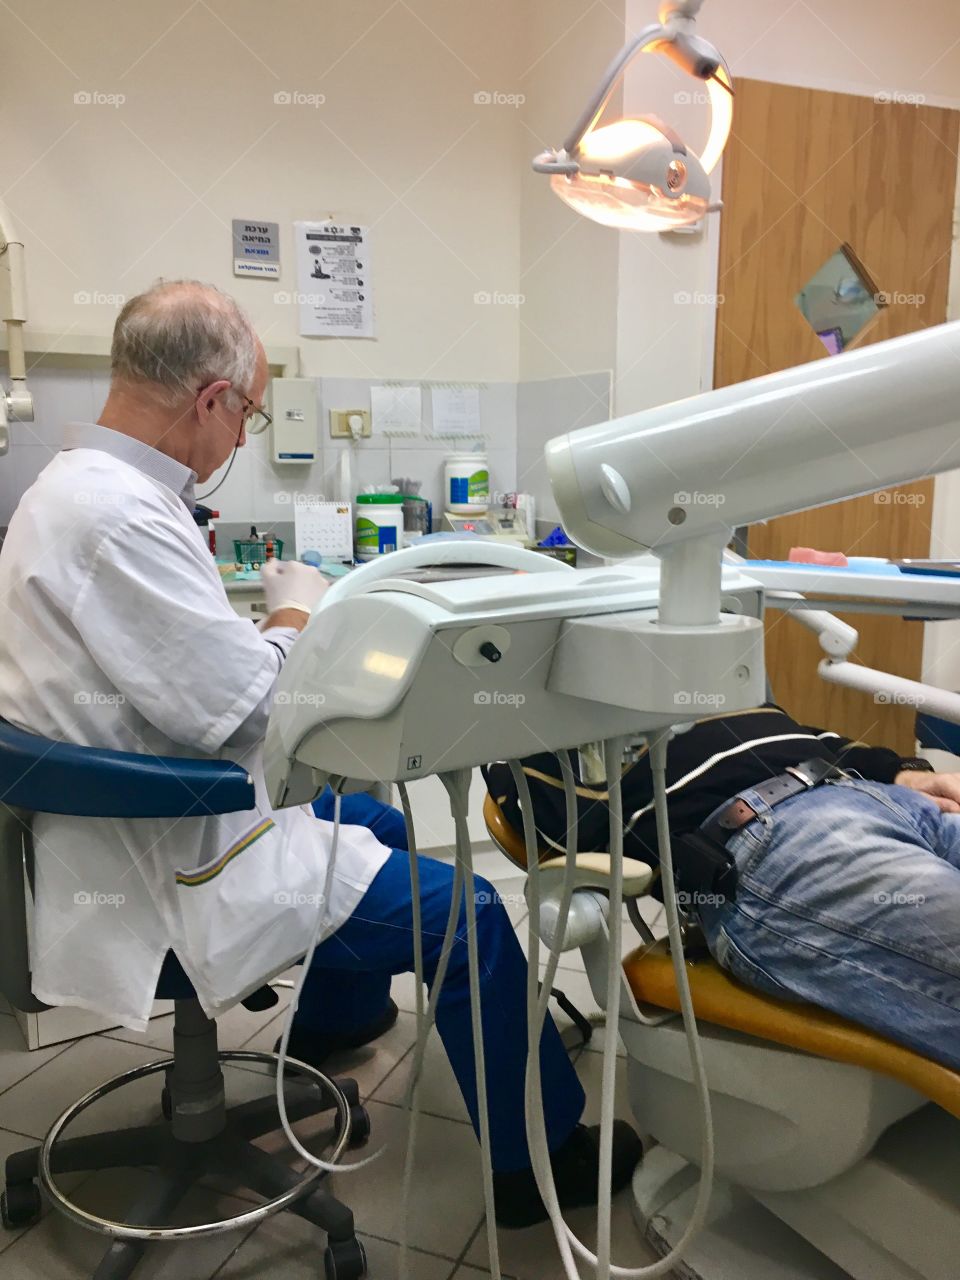 Treatment at the dentist